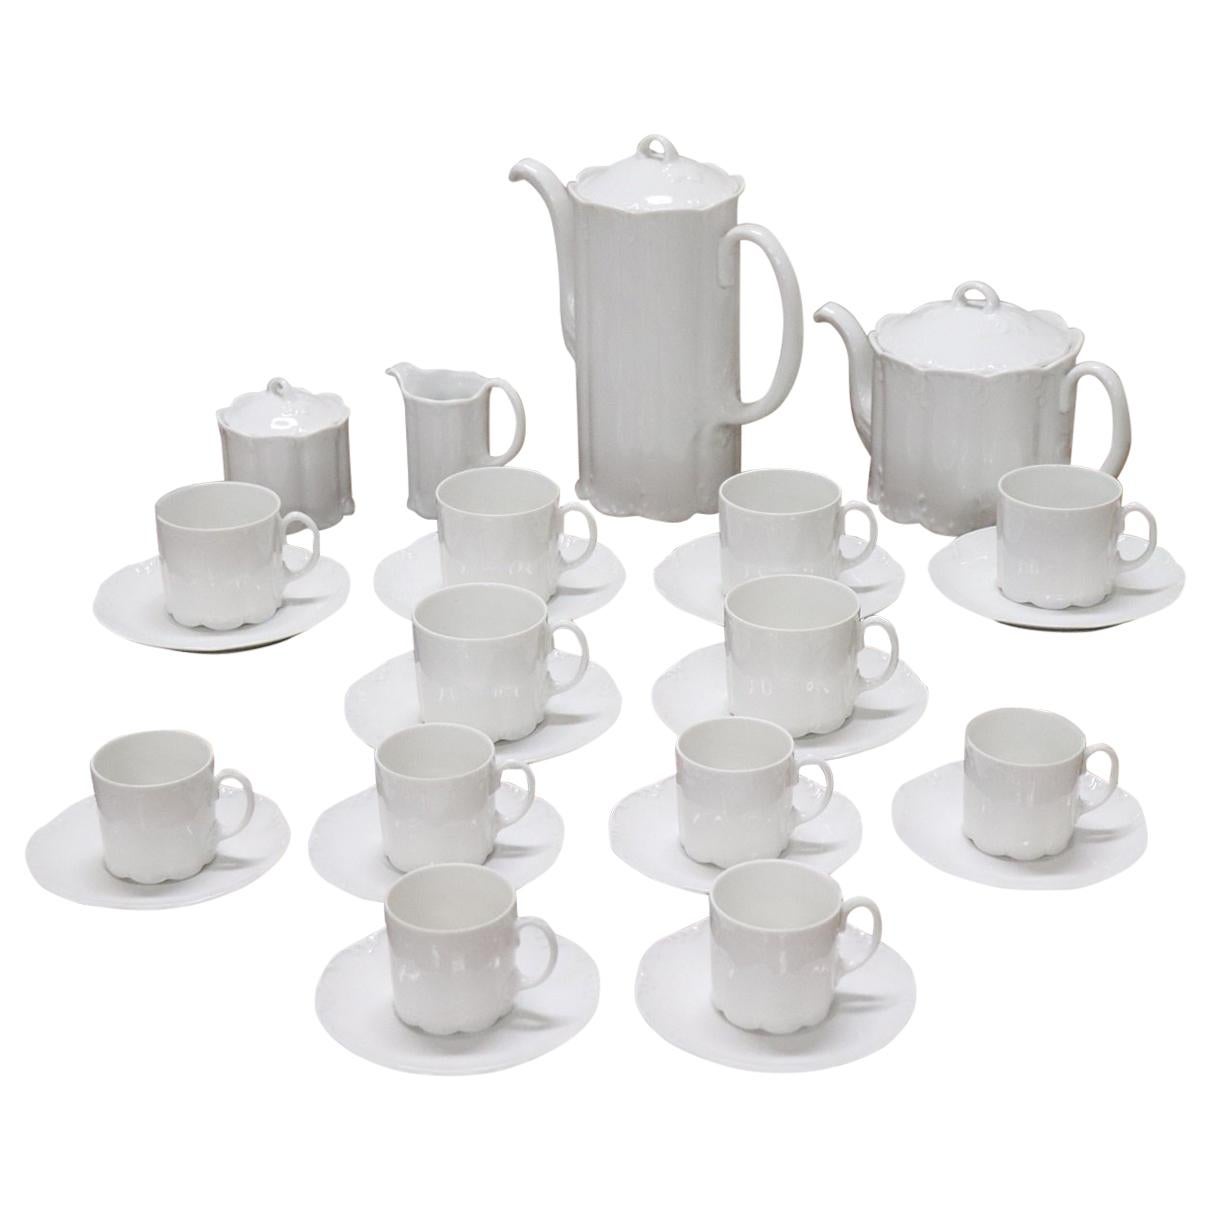 German White Porcelain Tea and Coffee Set by Rosenthal Group 28 Pieces